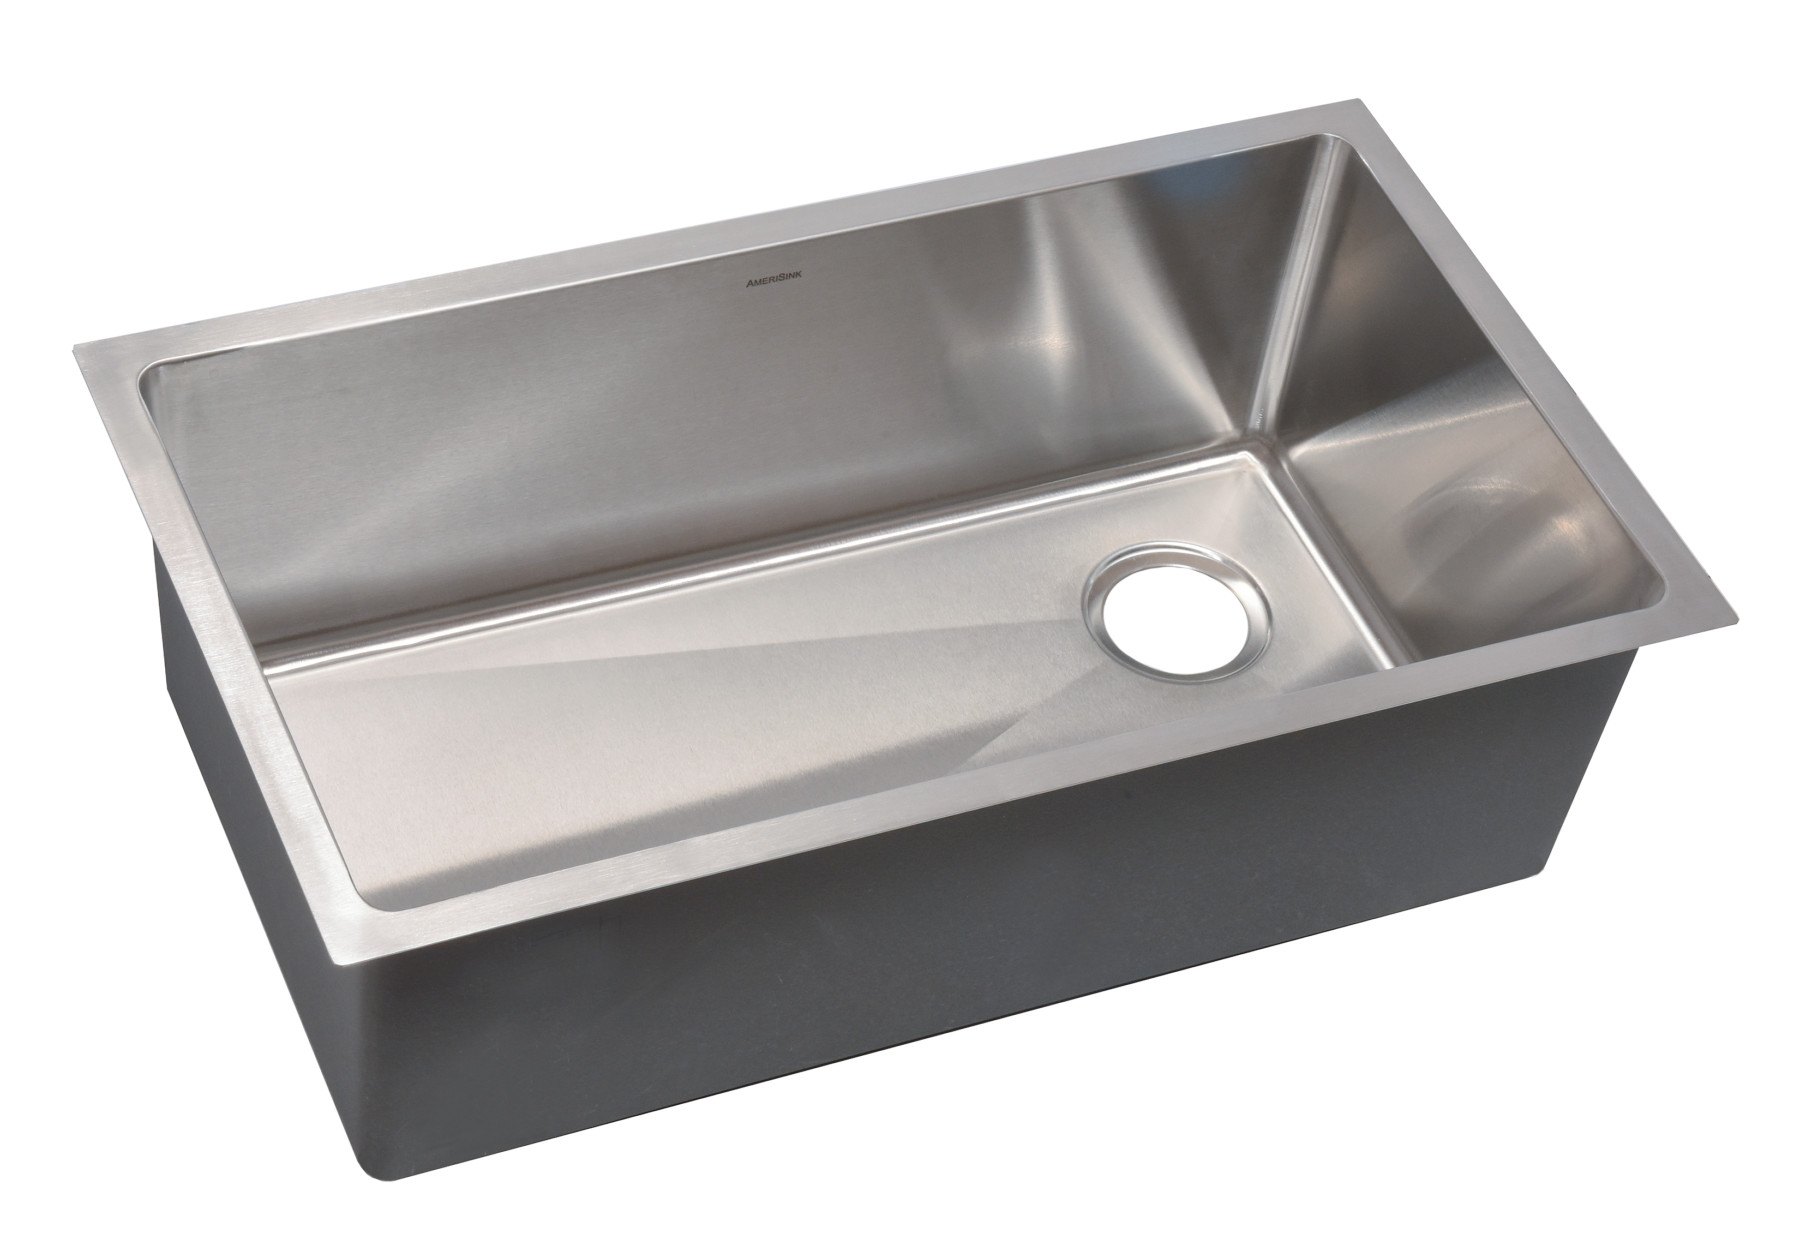 Quality Sinks And Fixtures Stainless Steel Sinks